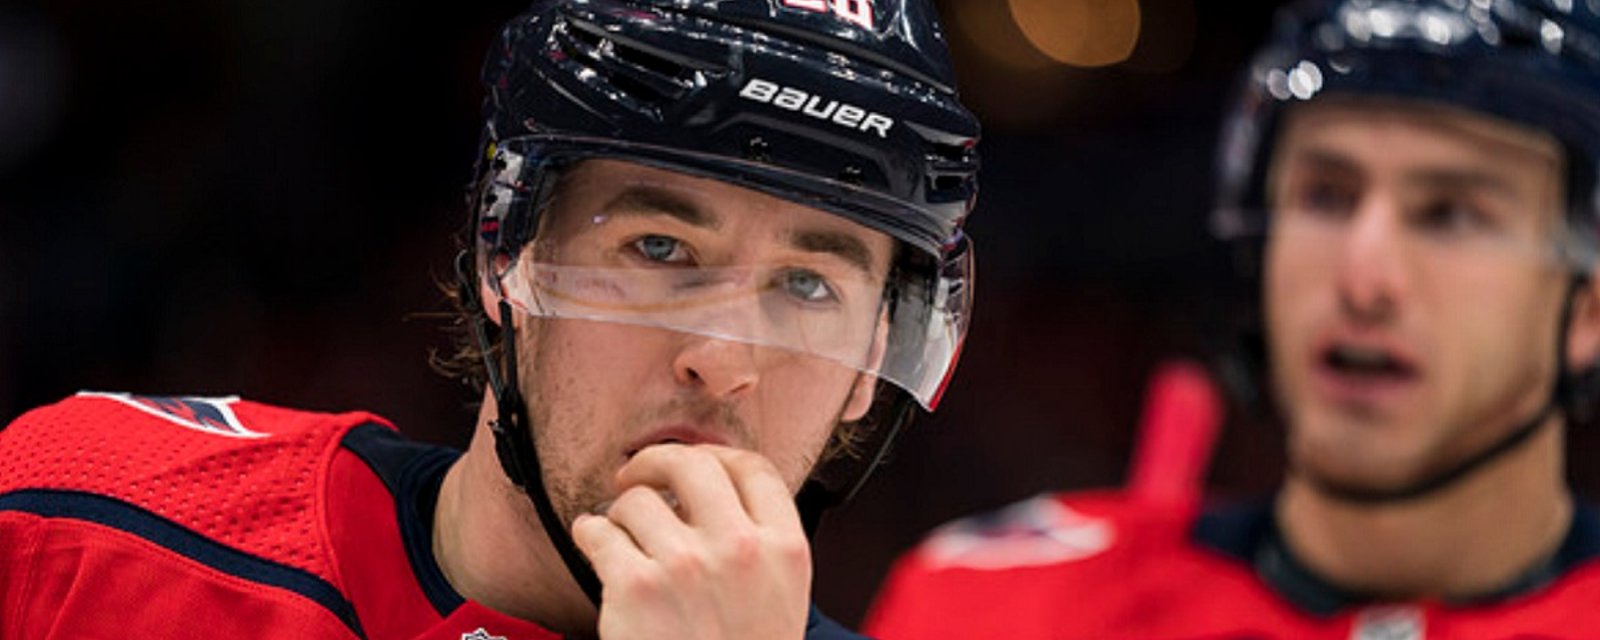 ICYMI: Washington Capitals cut ties with Brendan Leipsic over leaked messages.